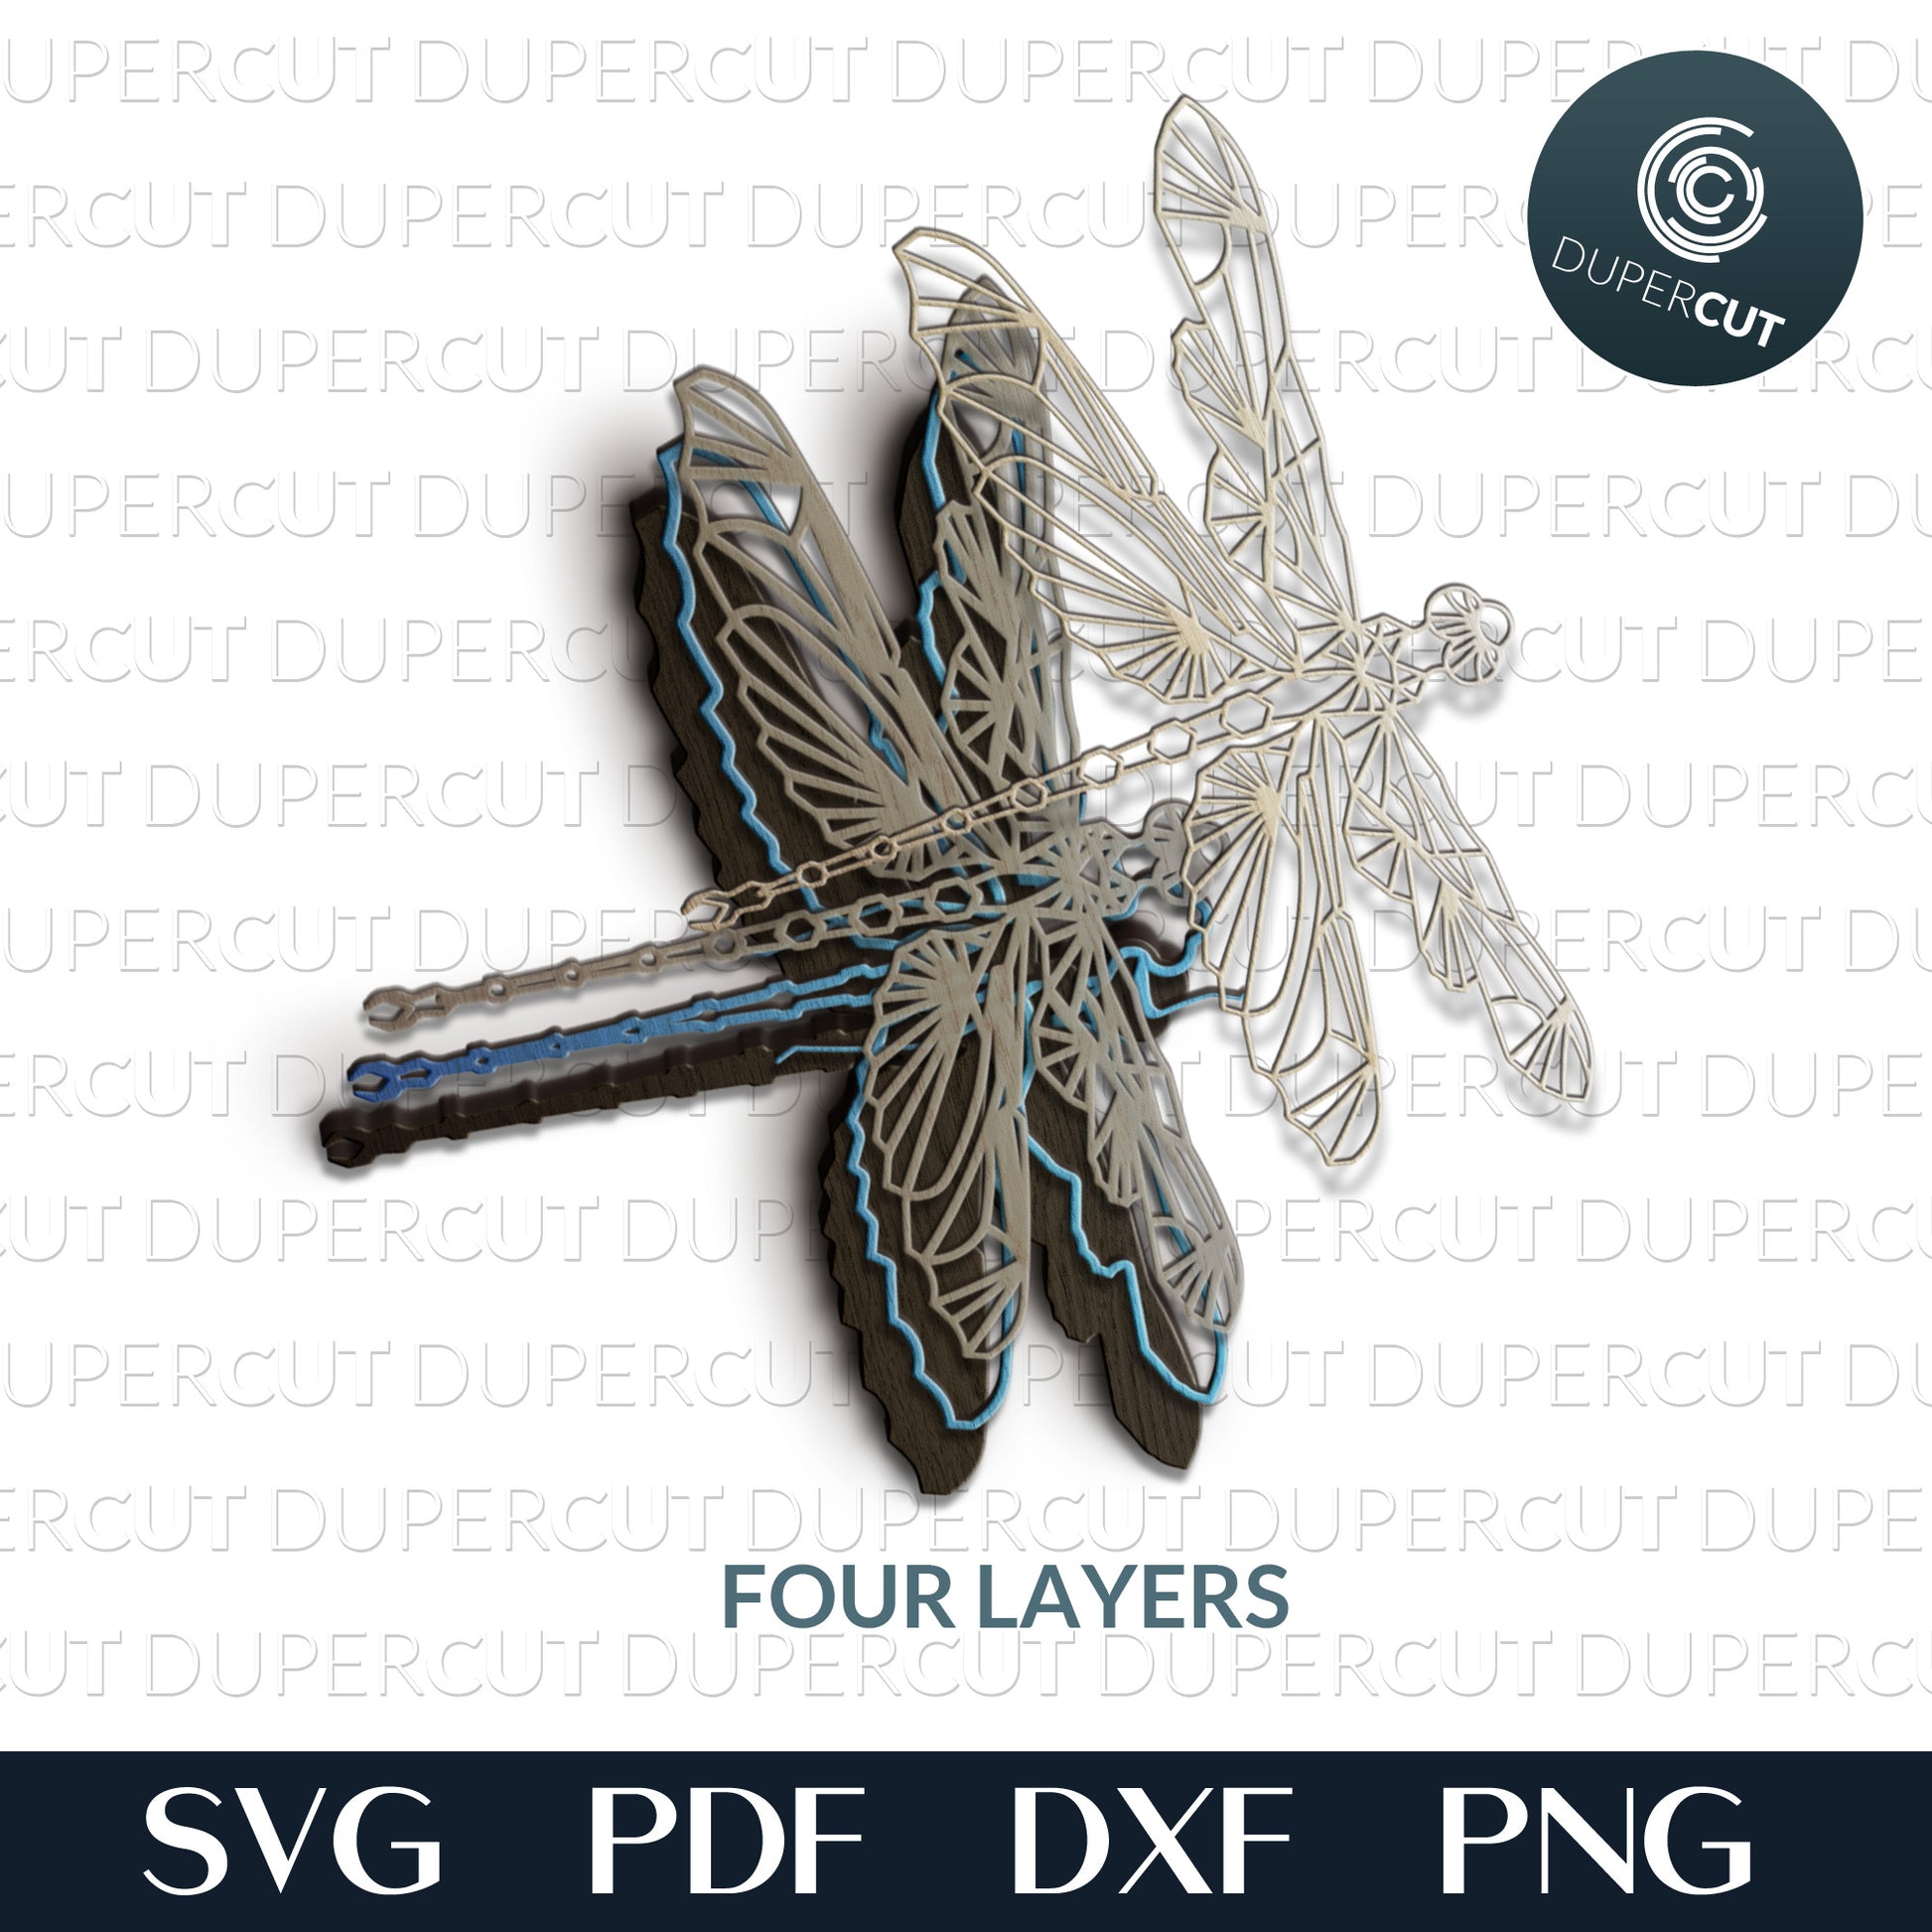 Dragonfly layered vector template for download, SVG PNG DXF files for cutting, laser engraving, scrapbooking. For use with Cricut, Glowforge, Silhouette, CNC machines.